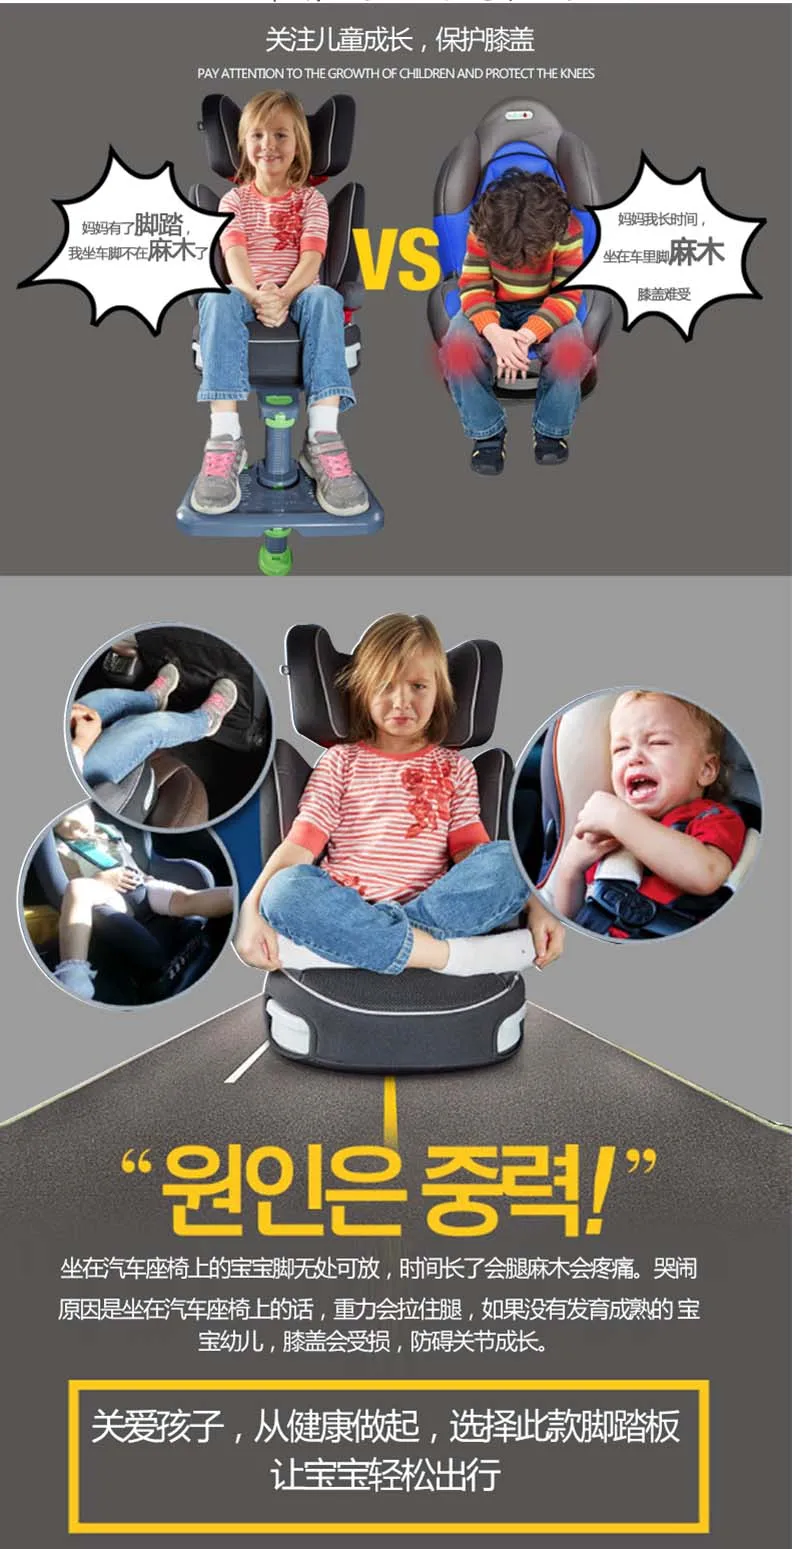  Car Seat Foot Rest for Kids (Grey) : Baby